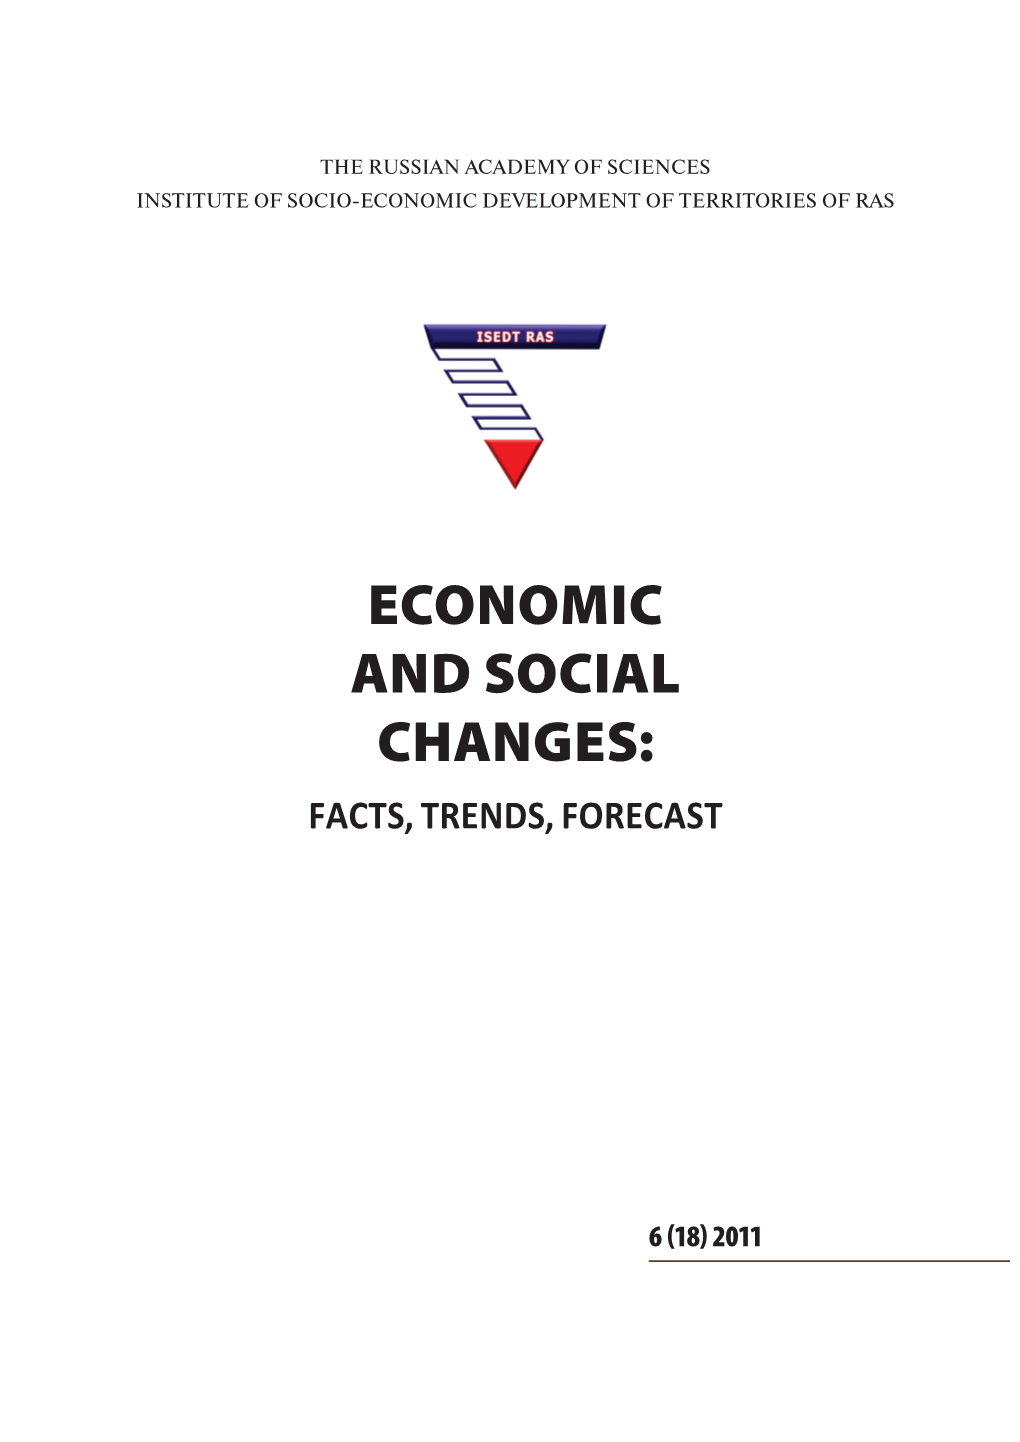 Economic and Social Changes: Facts, Trends, Forecast